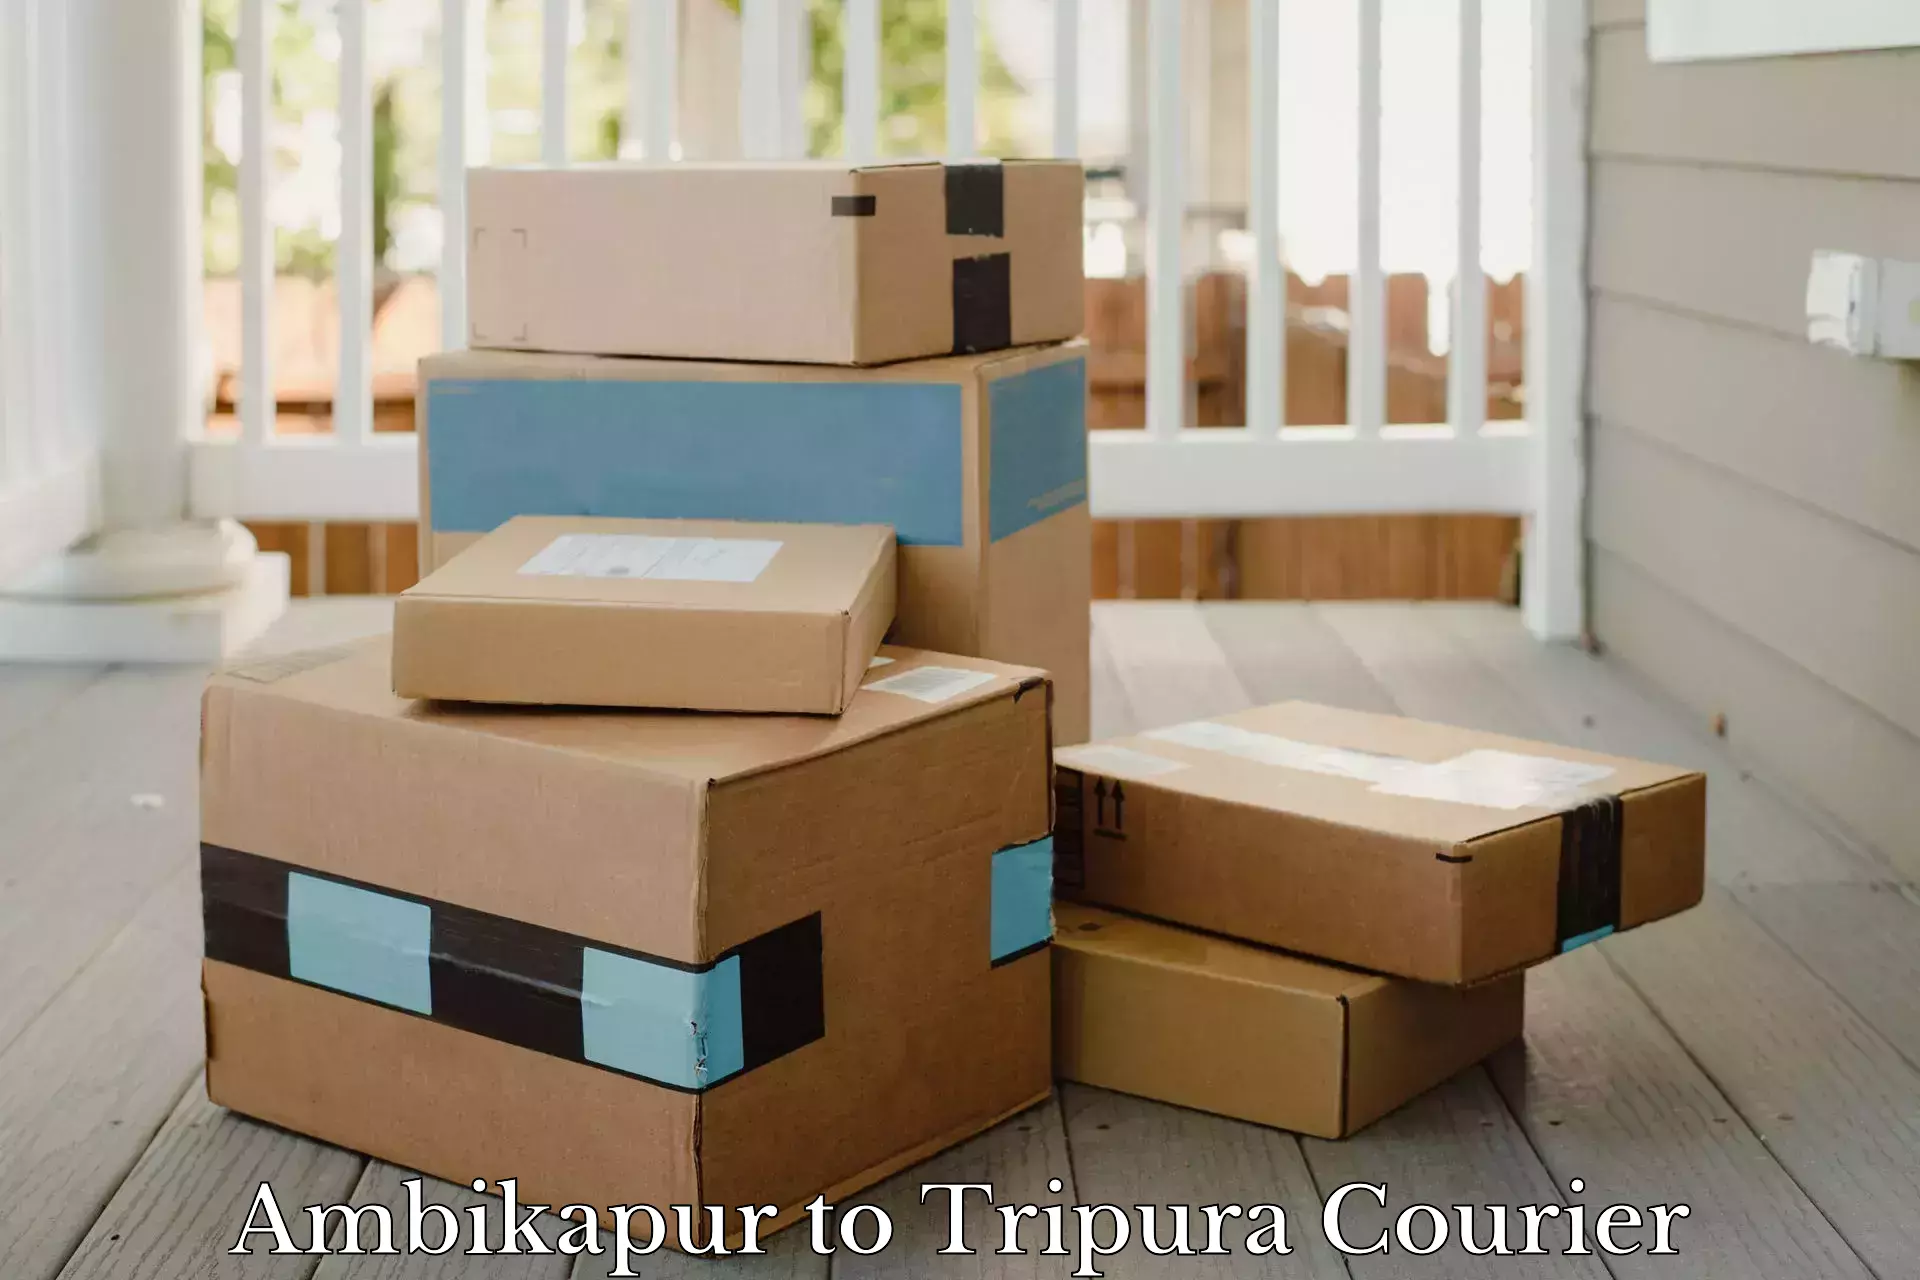 Multi-carrier shipping Ambikapur to Udaipur Tripura